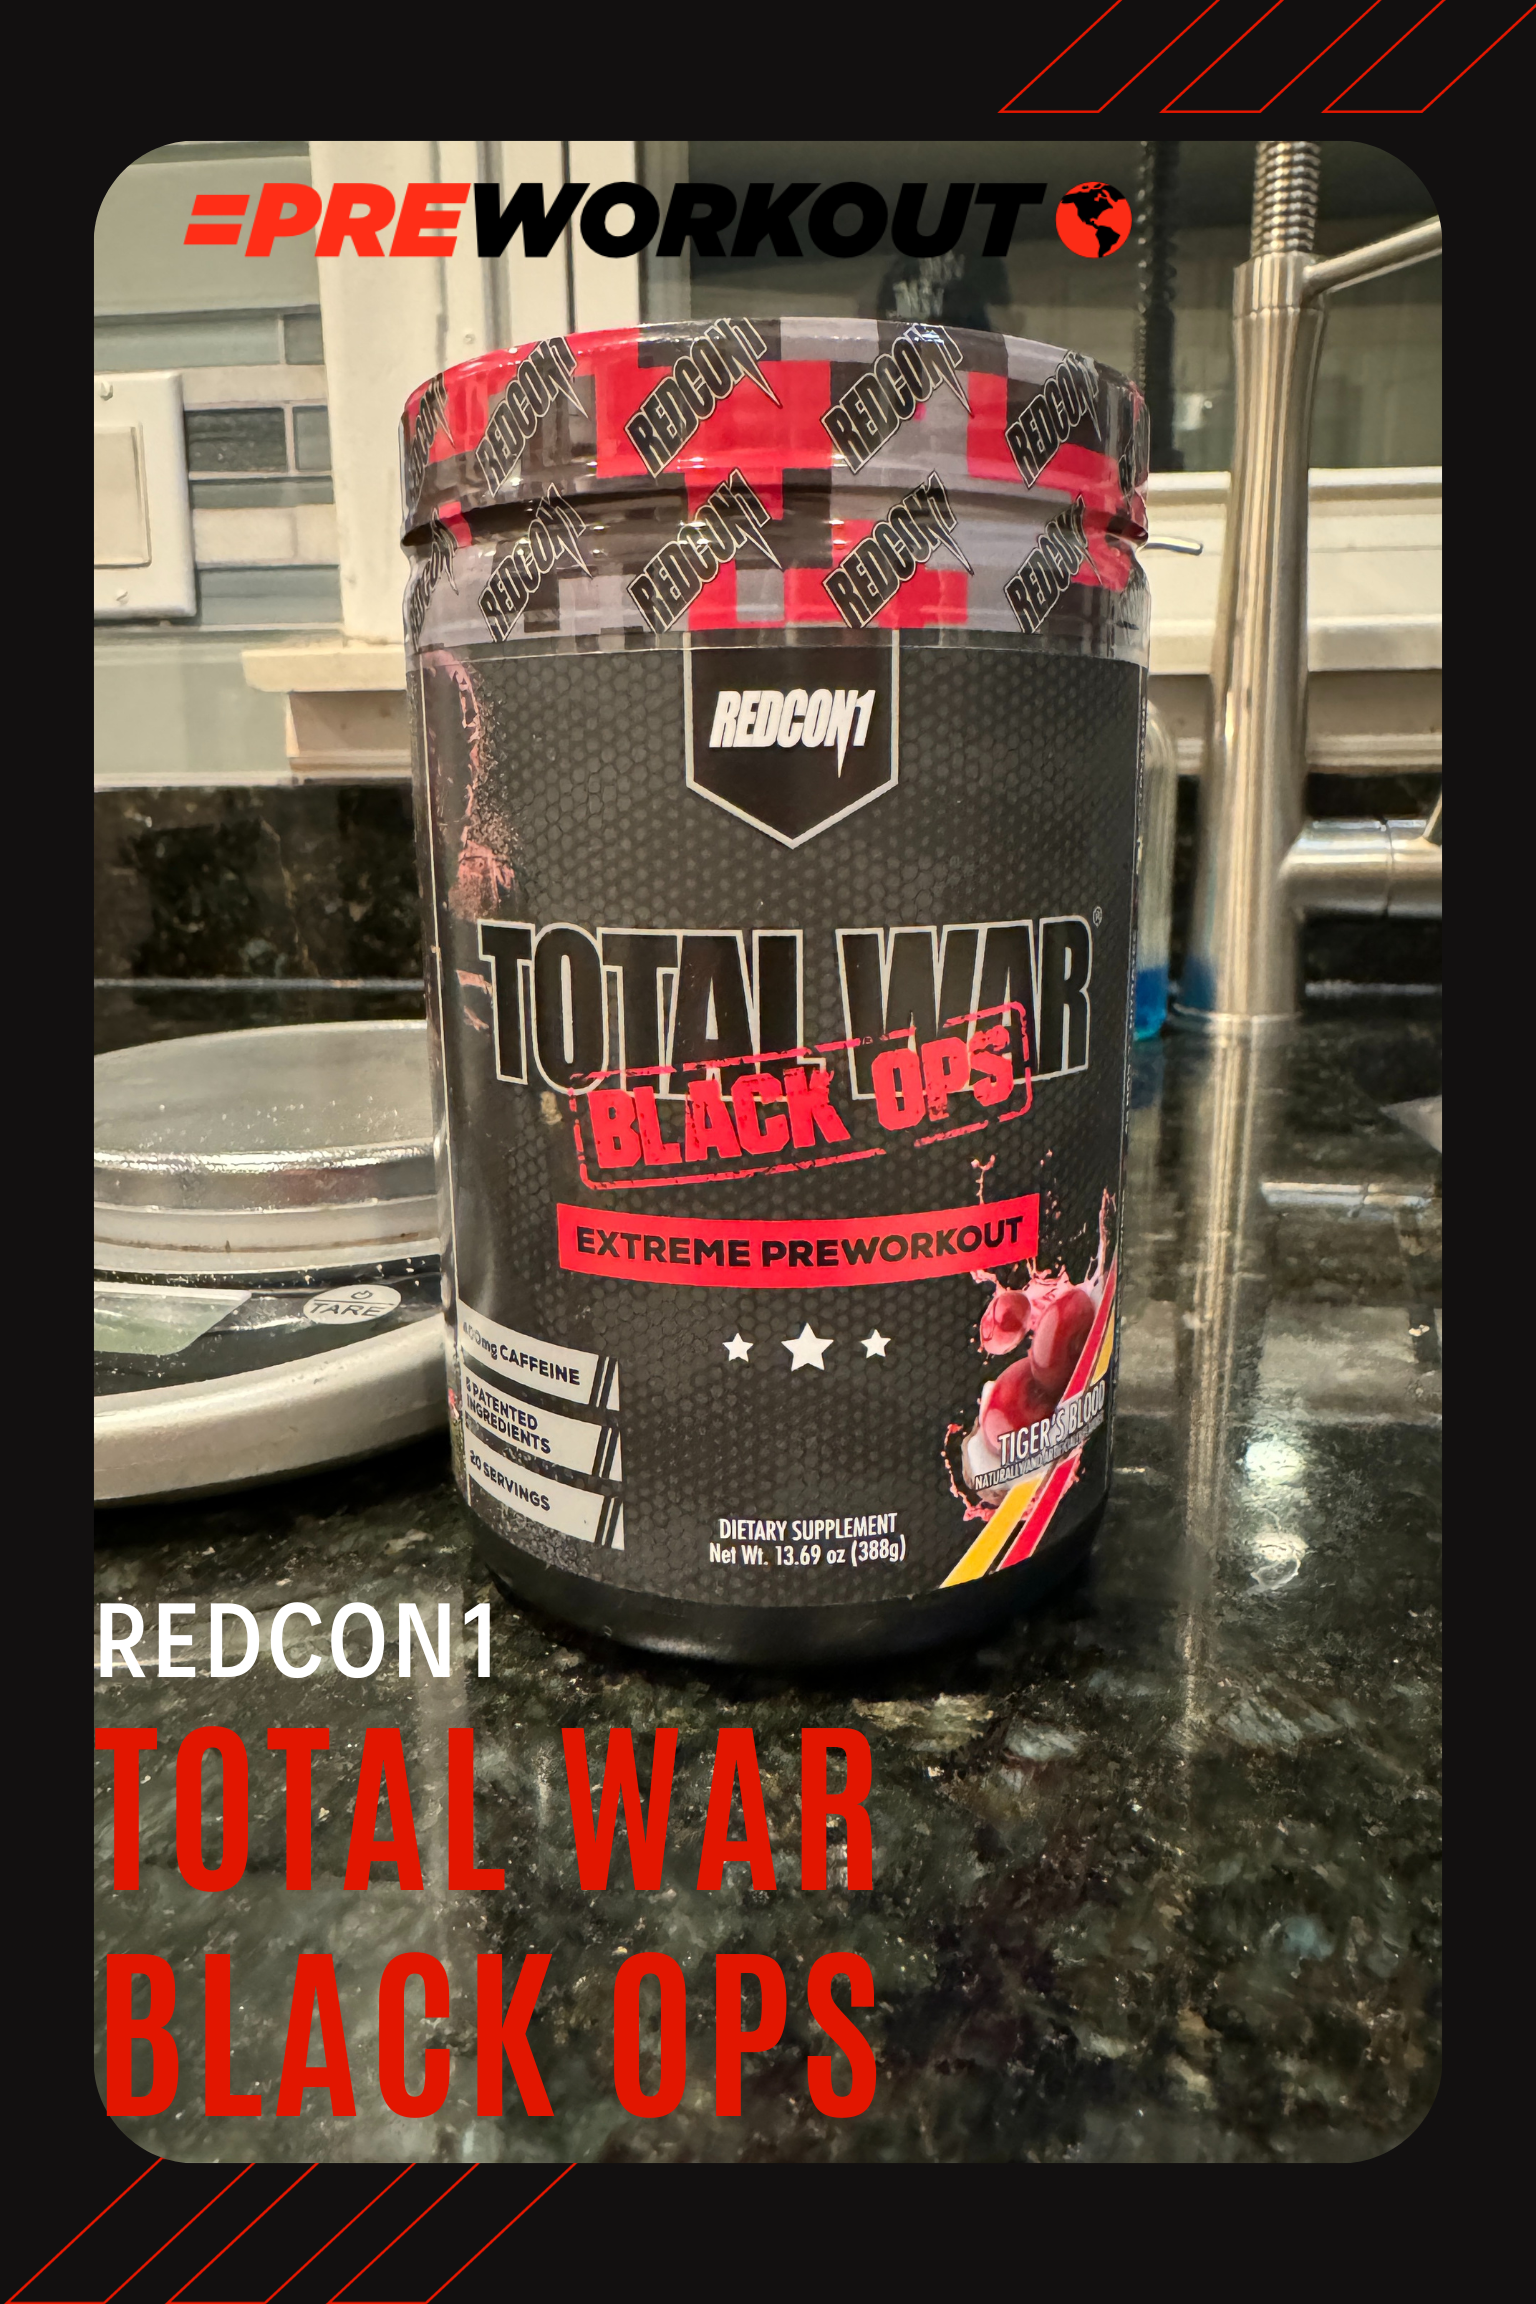 Redcon1 Total War Black Ops Front